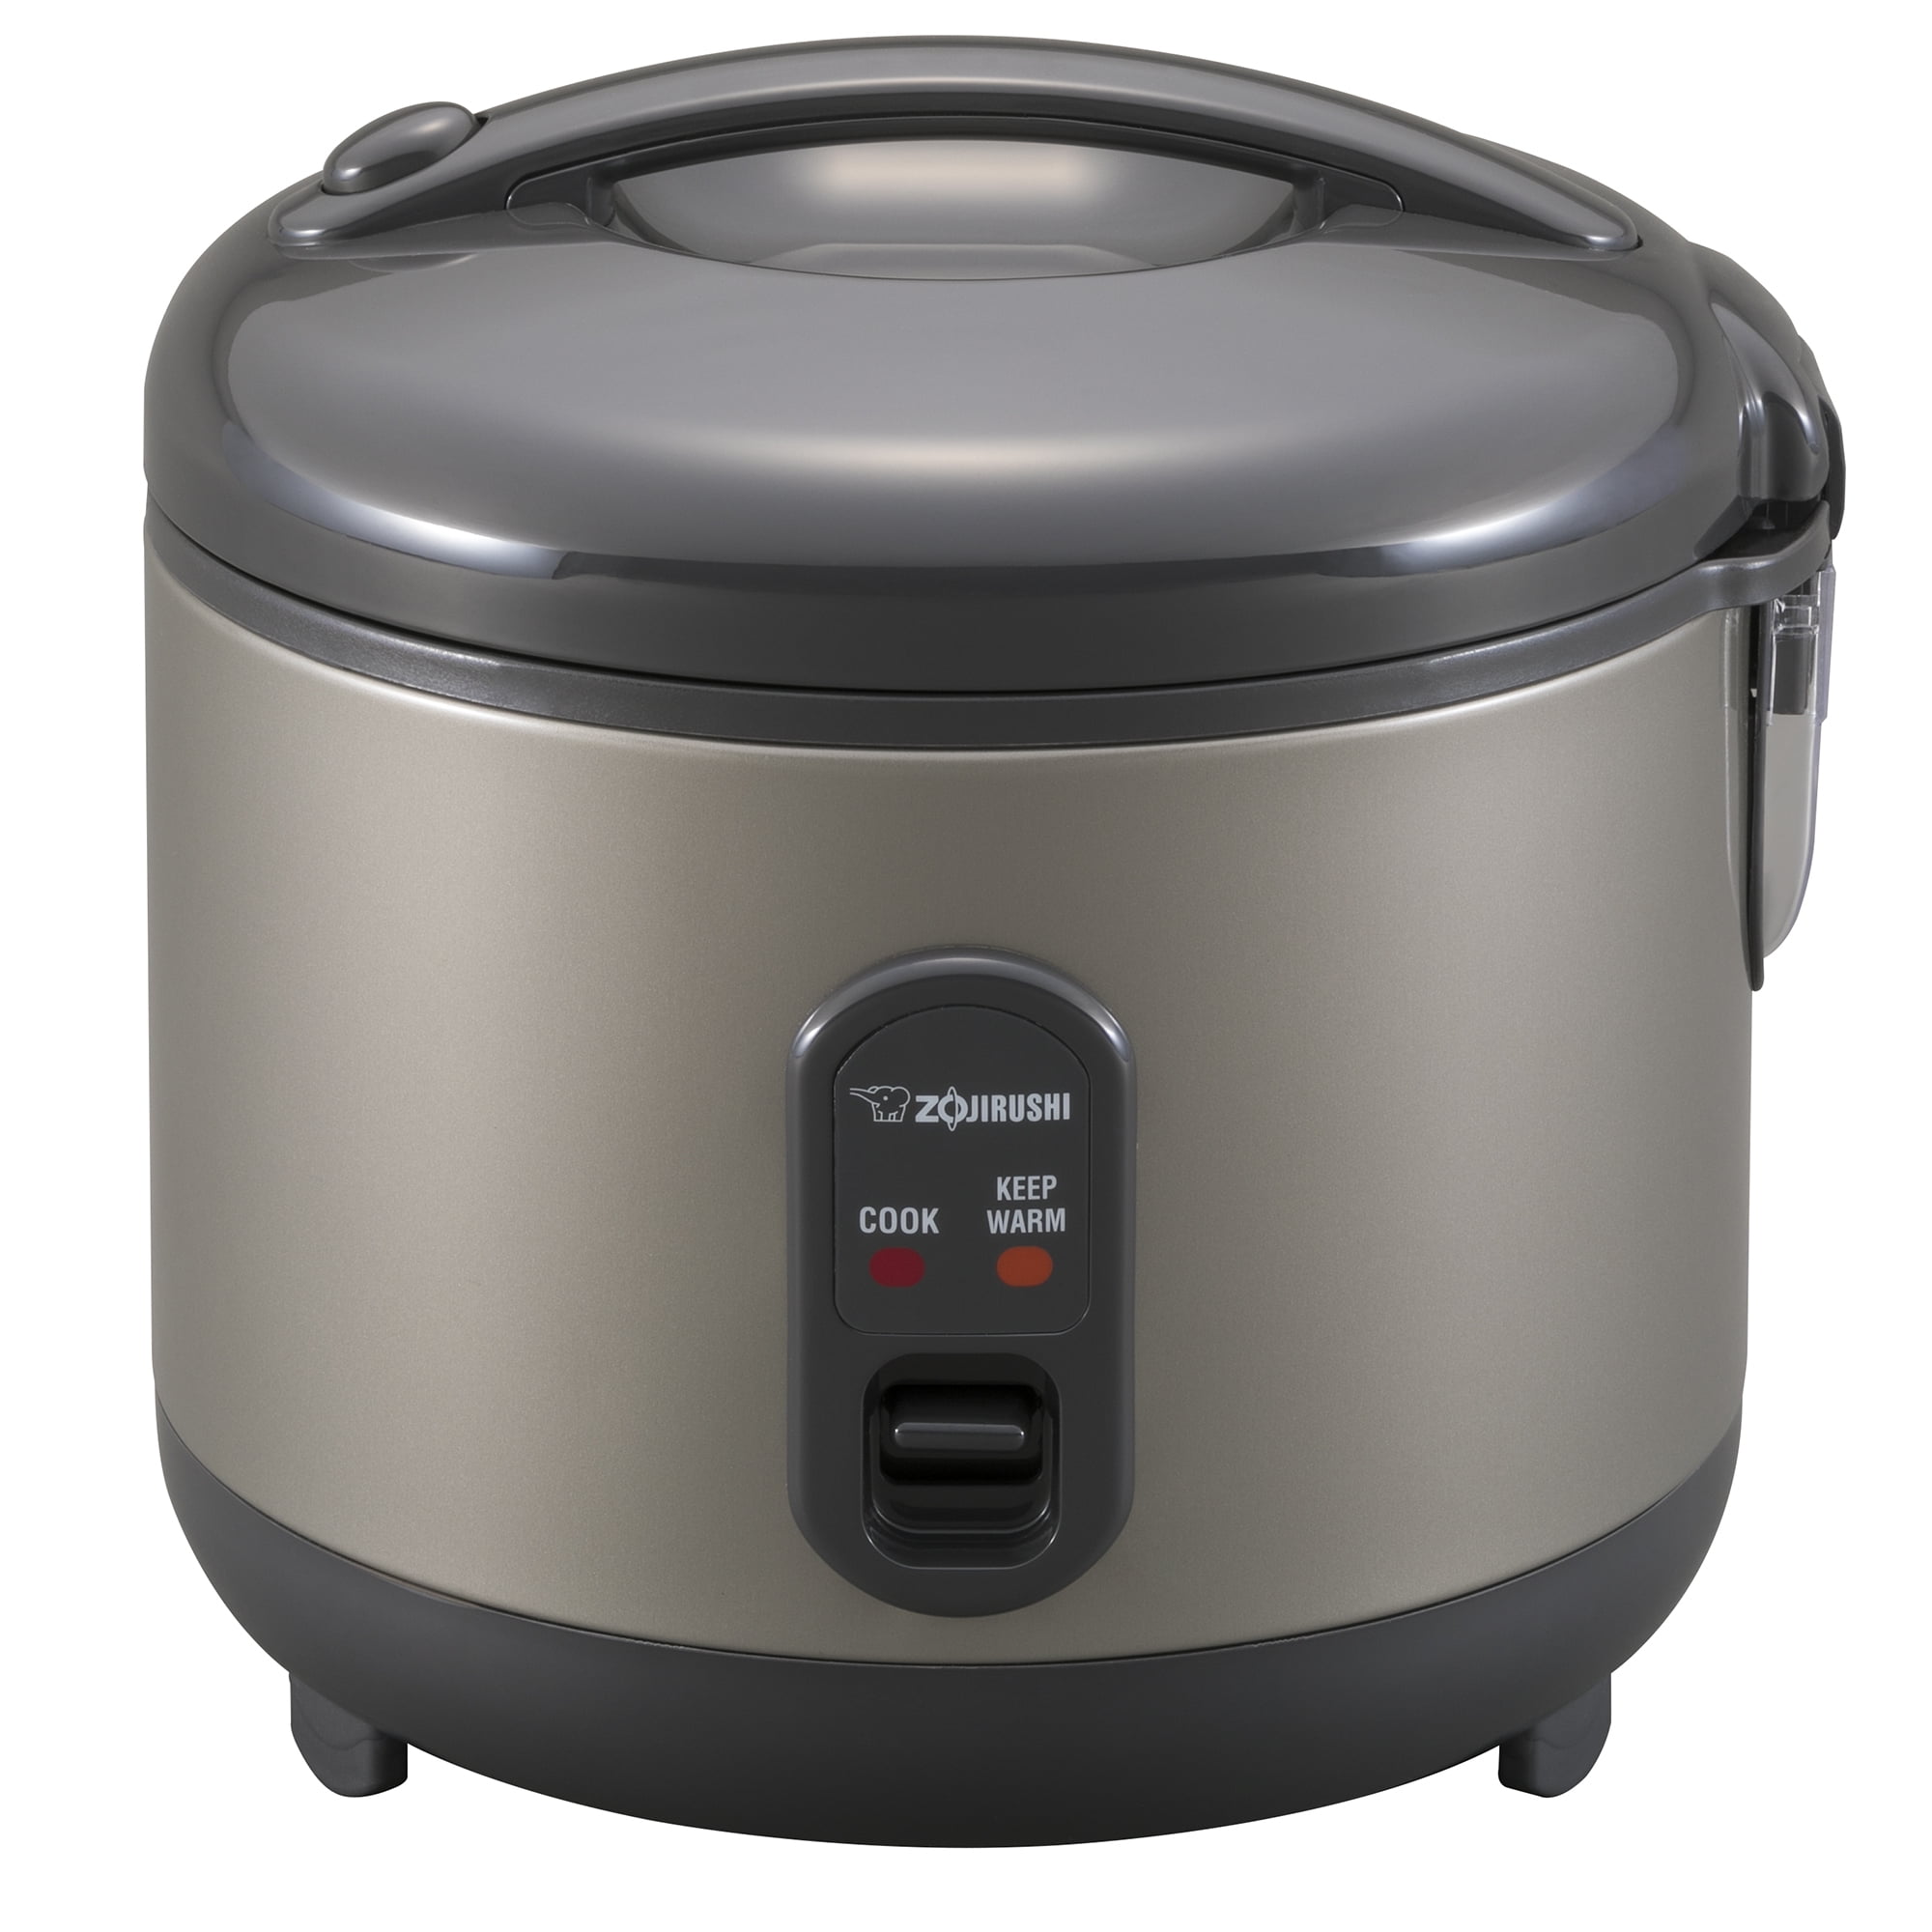 Aroma Rice Cooker review in English, Stainless Steel